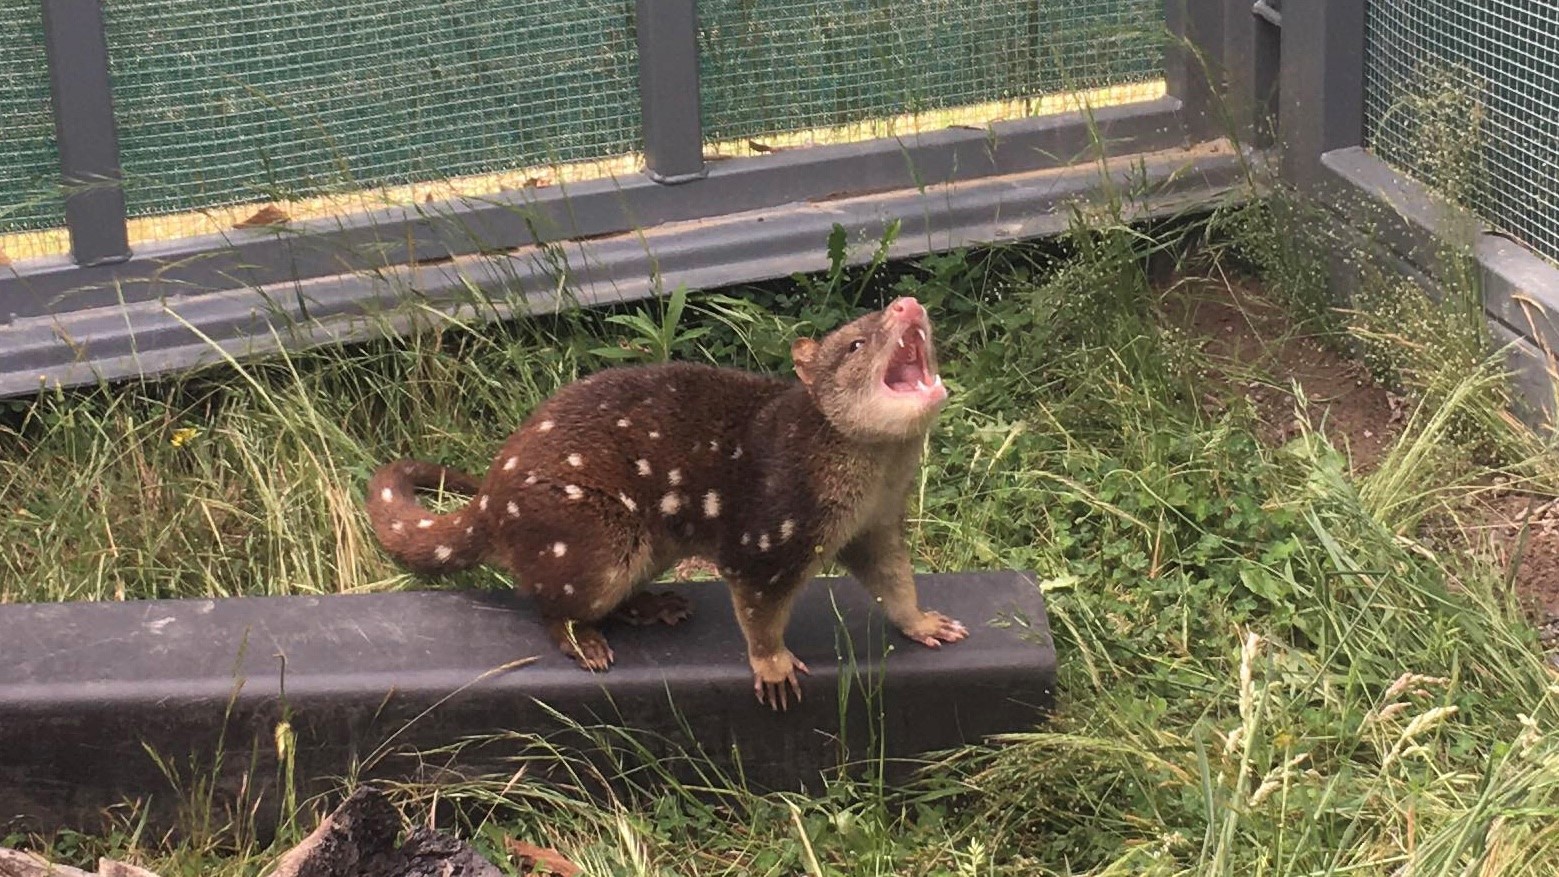 Who ya gonna quoll? The apex predator tasked with clearing out Mulligans unwanted guests